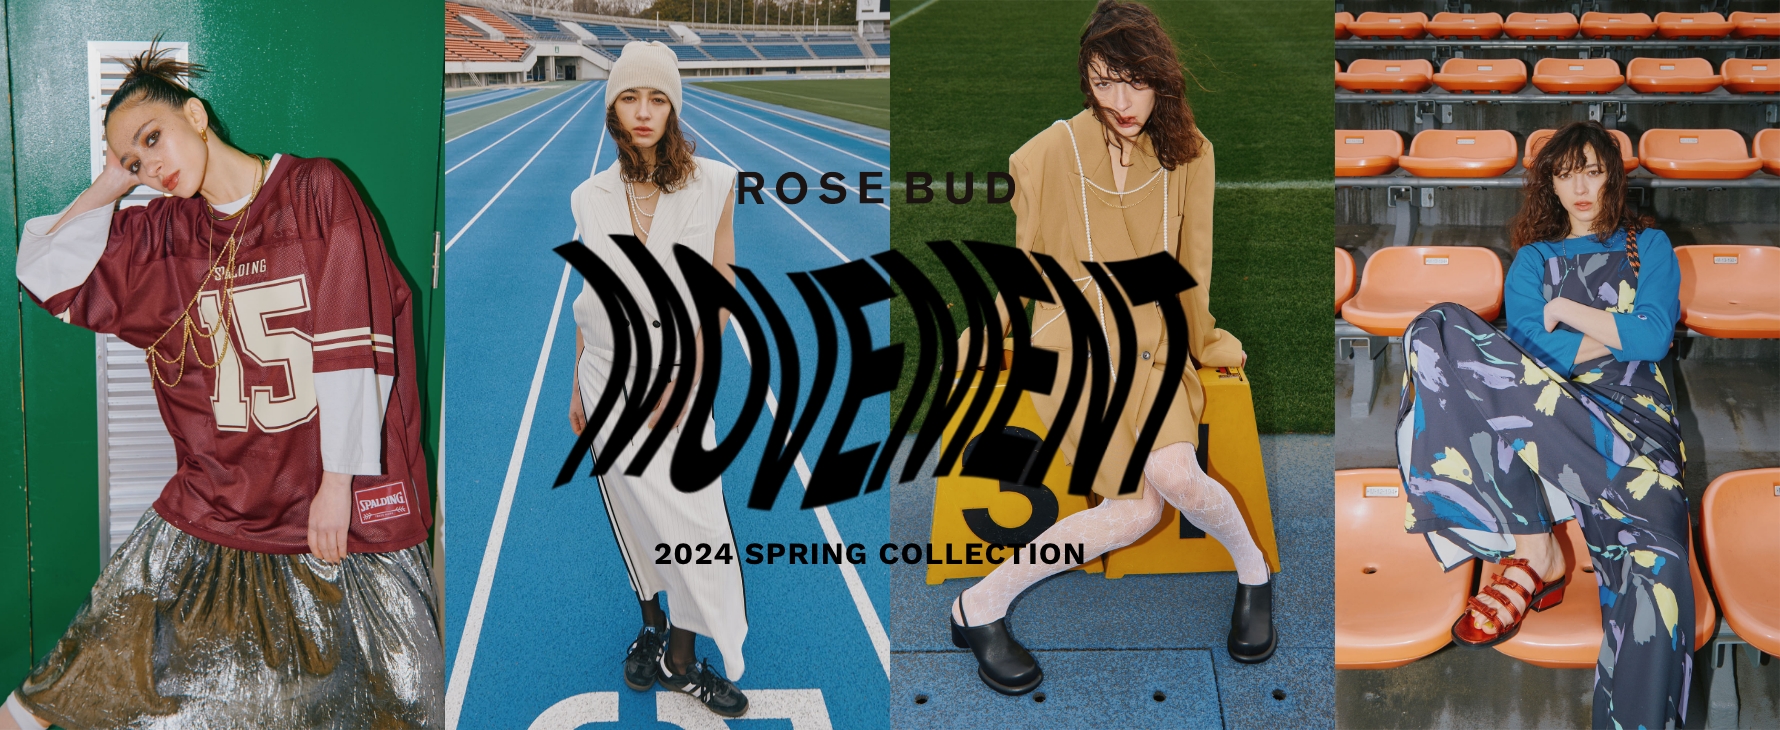 【ROSE BUD】2024 SPRING COLLECTION LOOK公開！